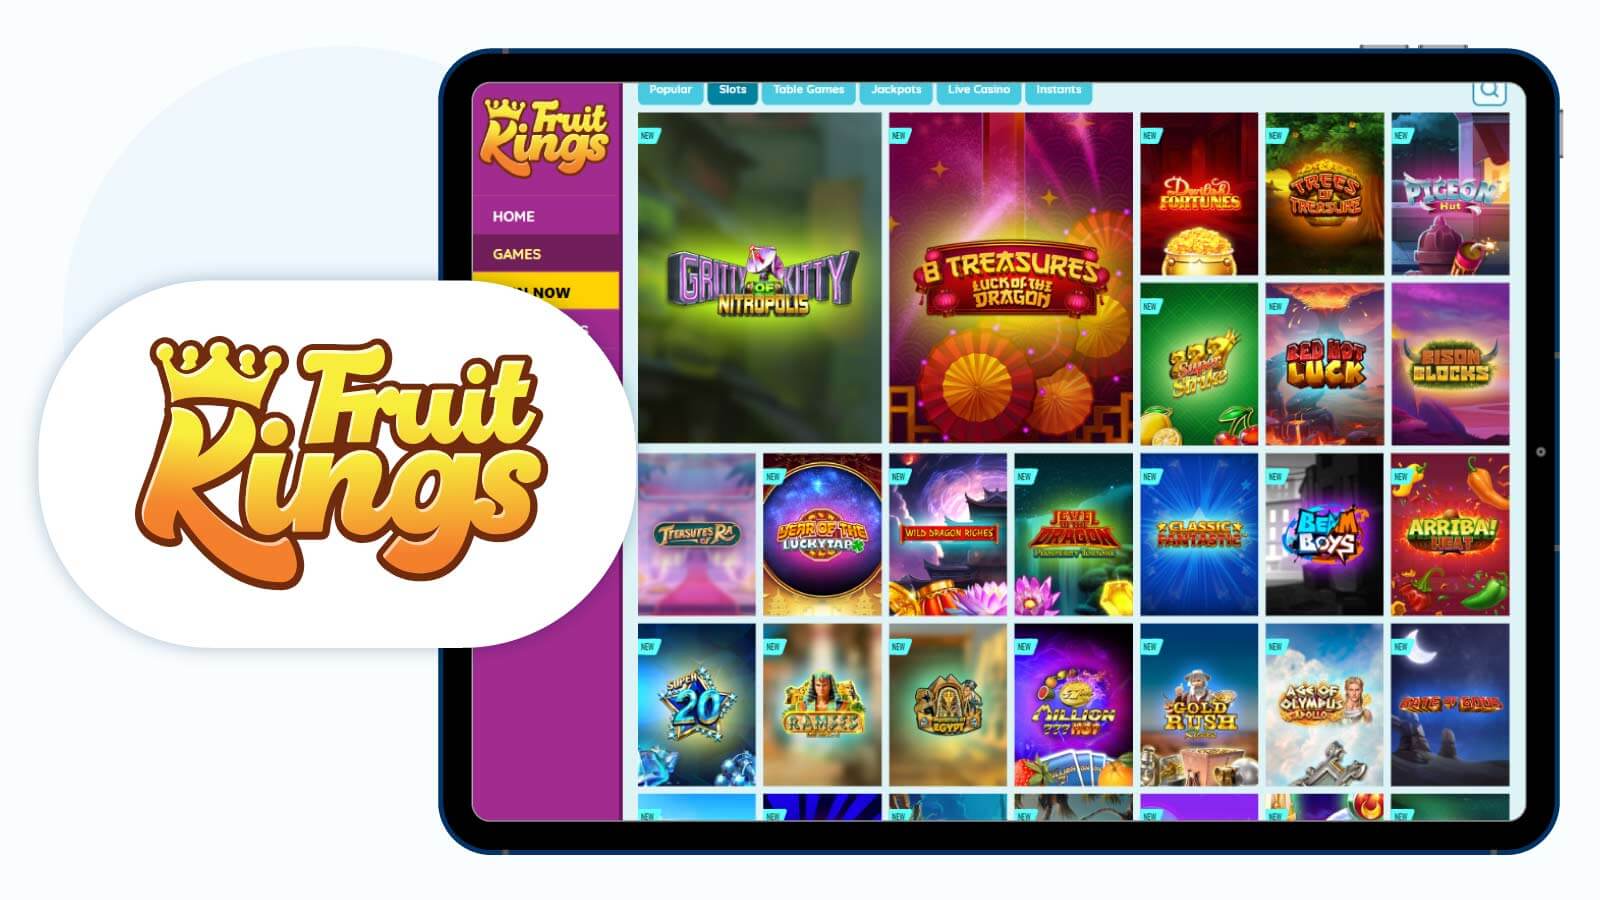 FruitKings-Casino-Top-Online-Casino-Providers-at-Trustly-Sites